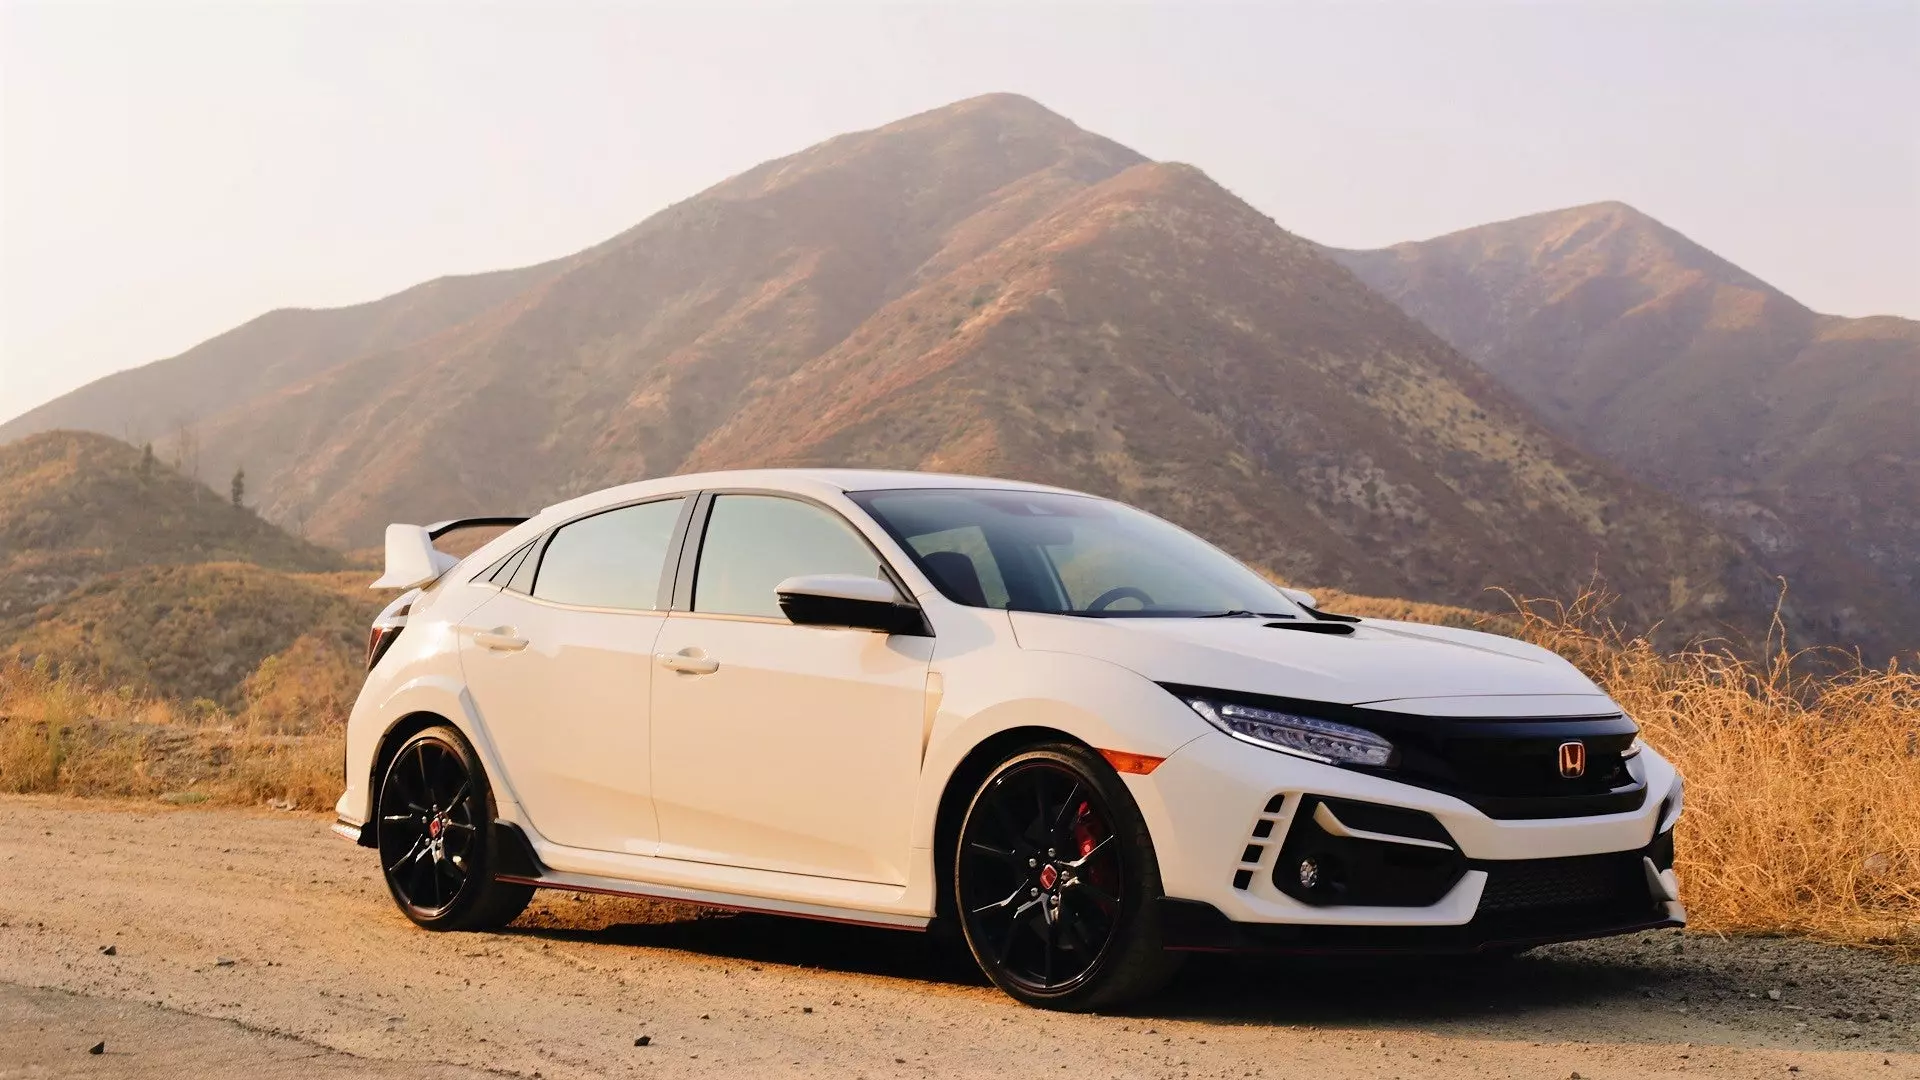 The Civic Type R Could Make a Front-Wheel Drive Evangelist Out of Almost Anyone